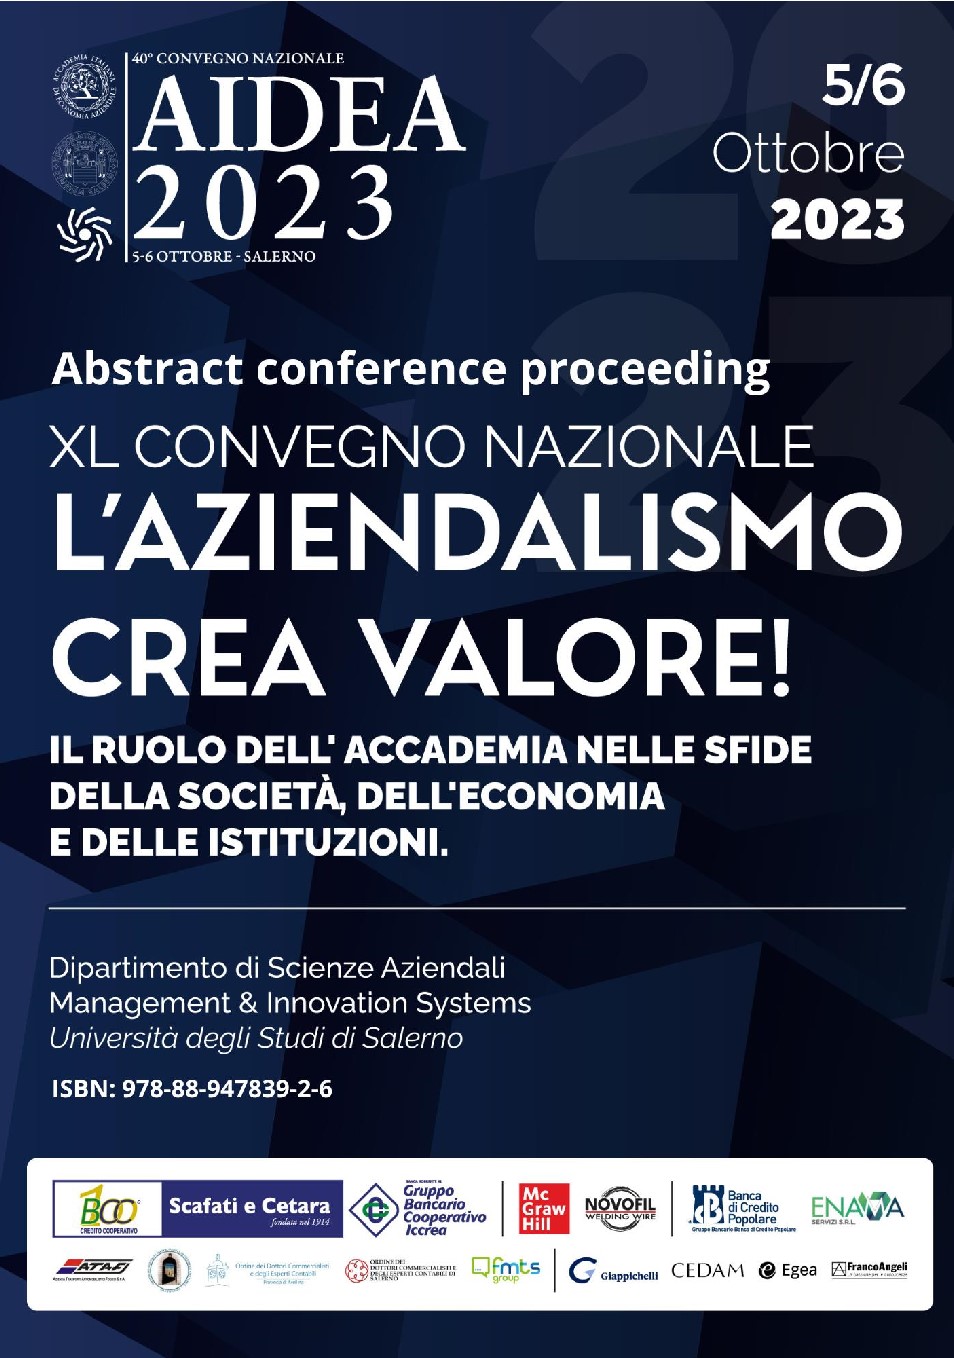 Aziendalismo crea valore! – extended abstract